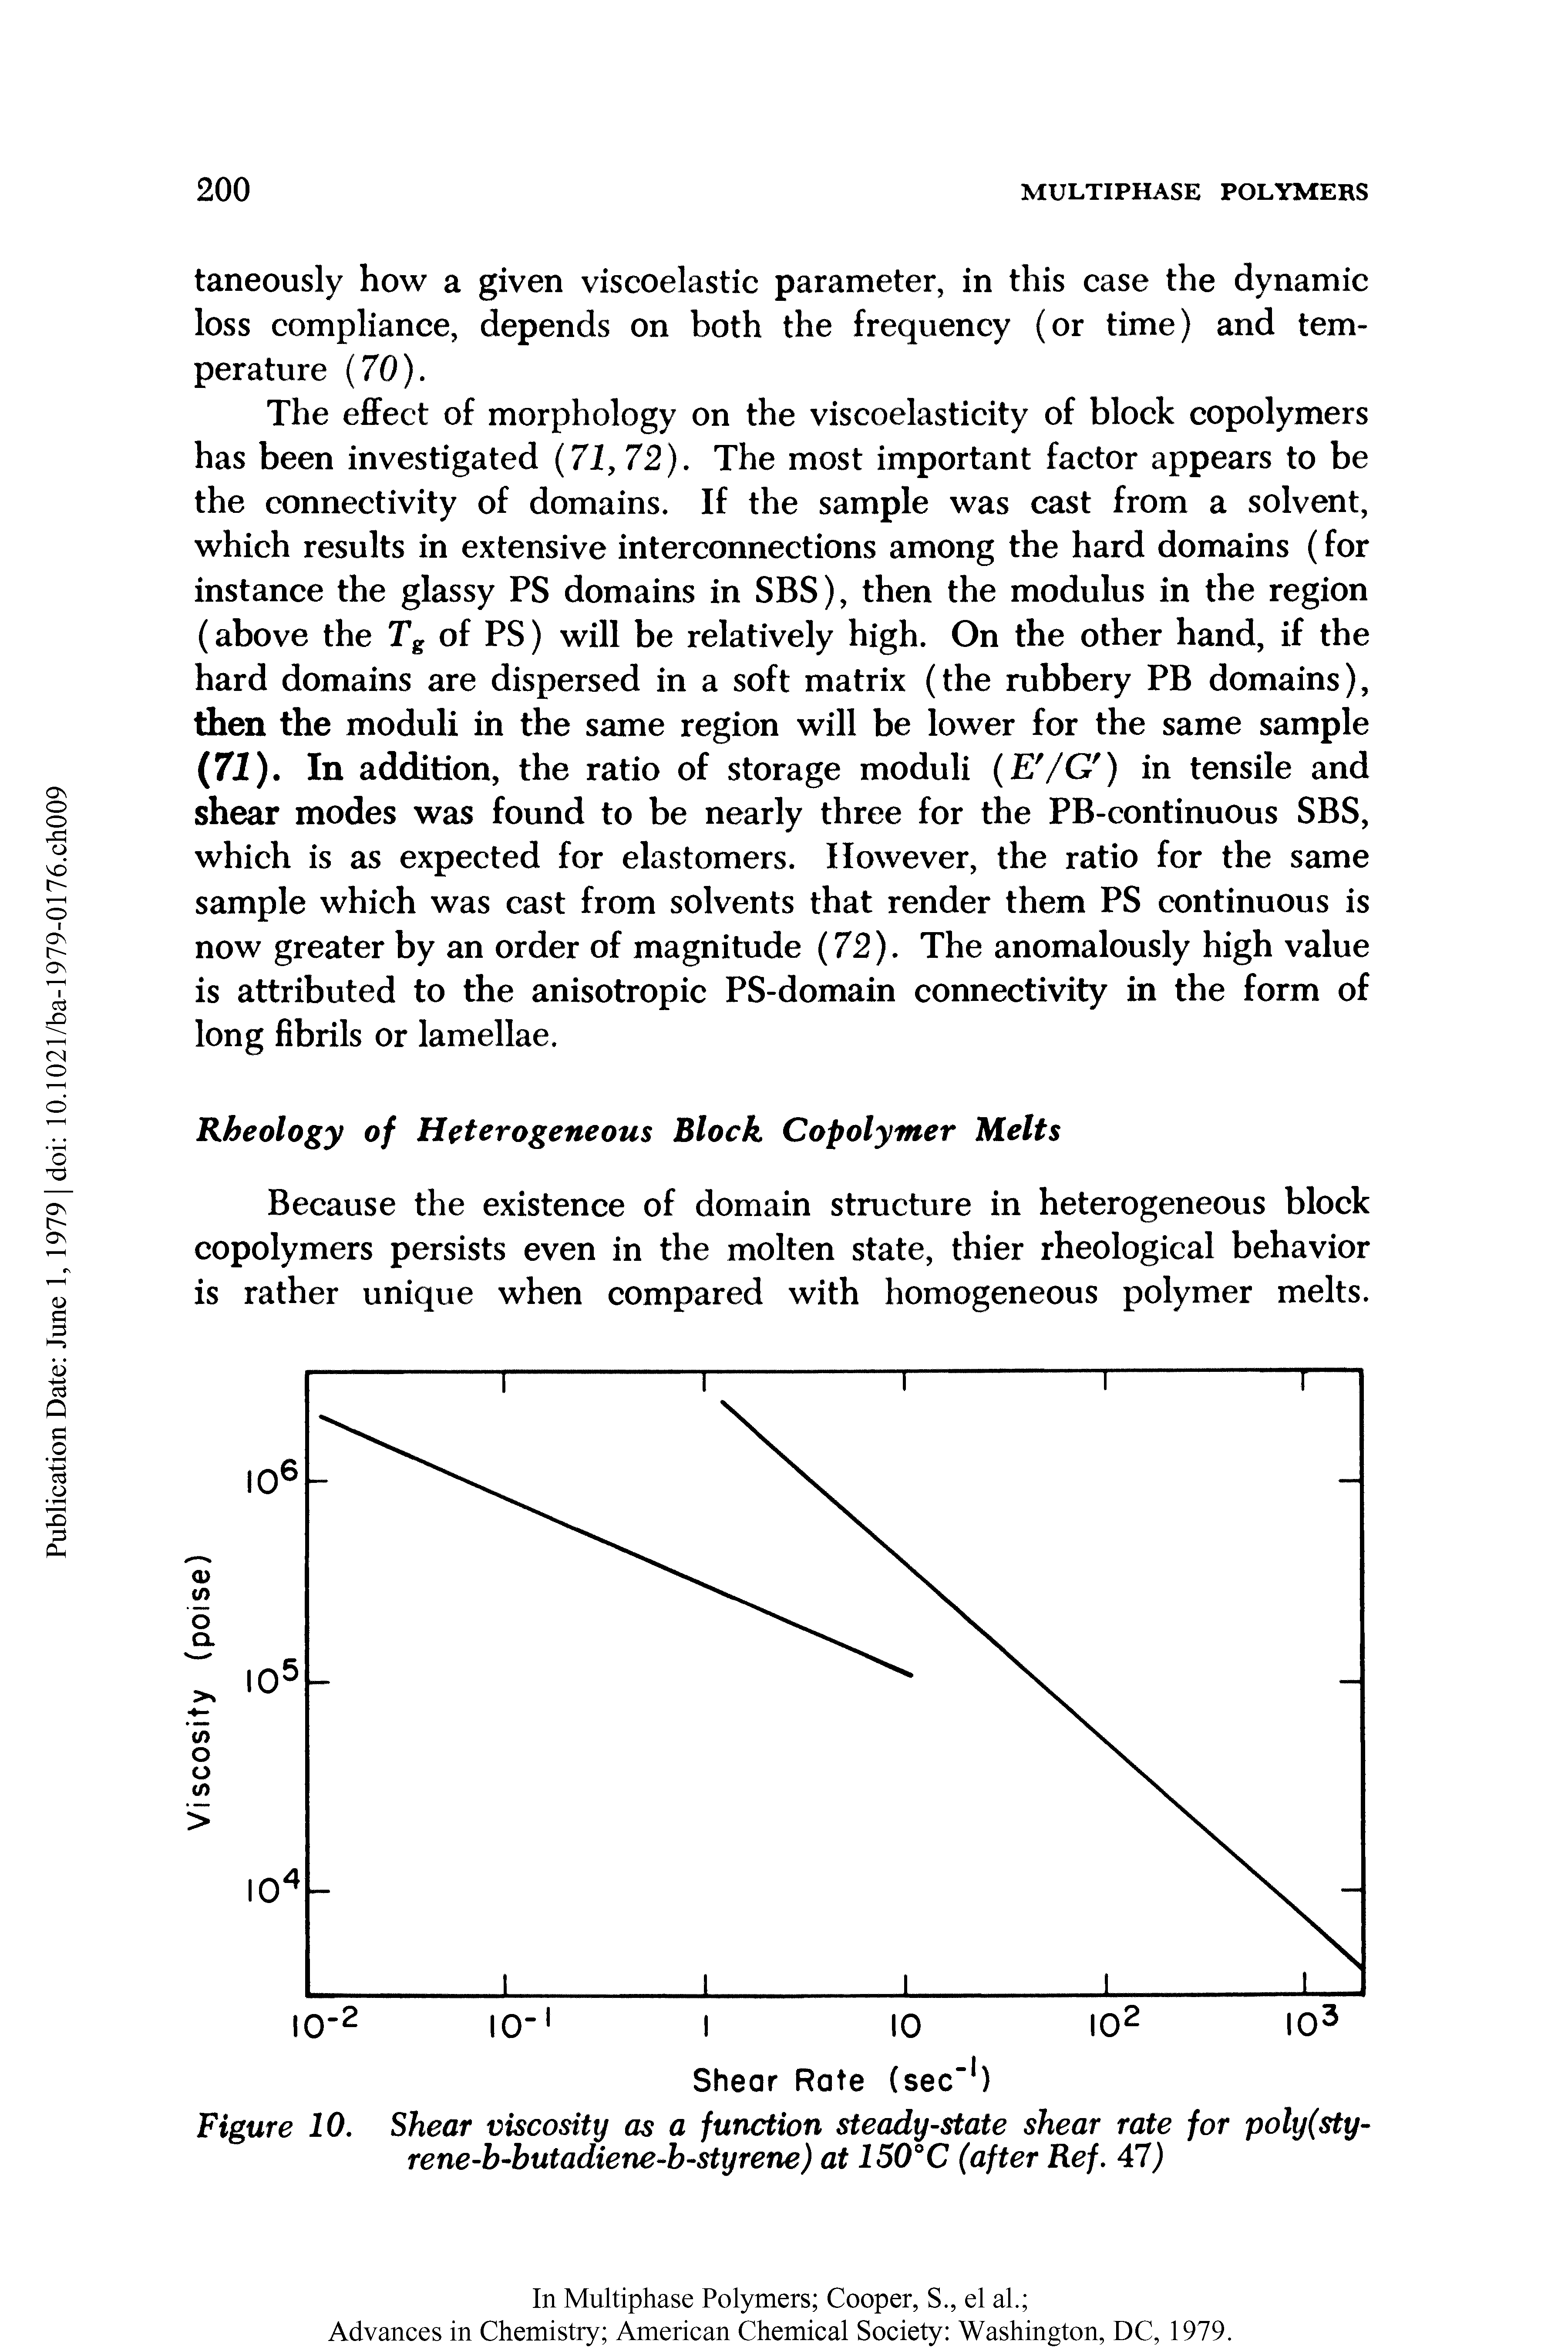 Figure 10. Shear viscosity as a function steady-state shear rate for poly(sty-rene-b-butadiene-b-styrene) at 150°C (after Ref. 47)...